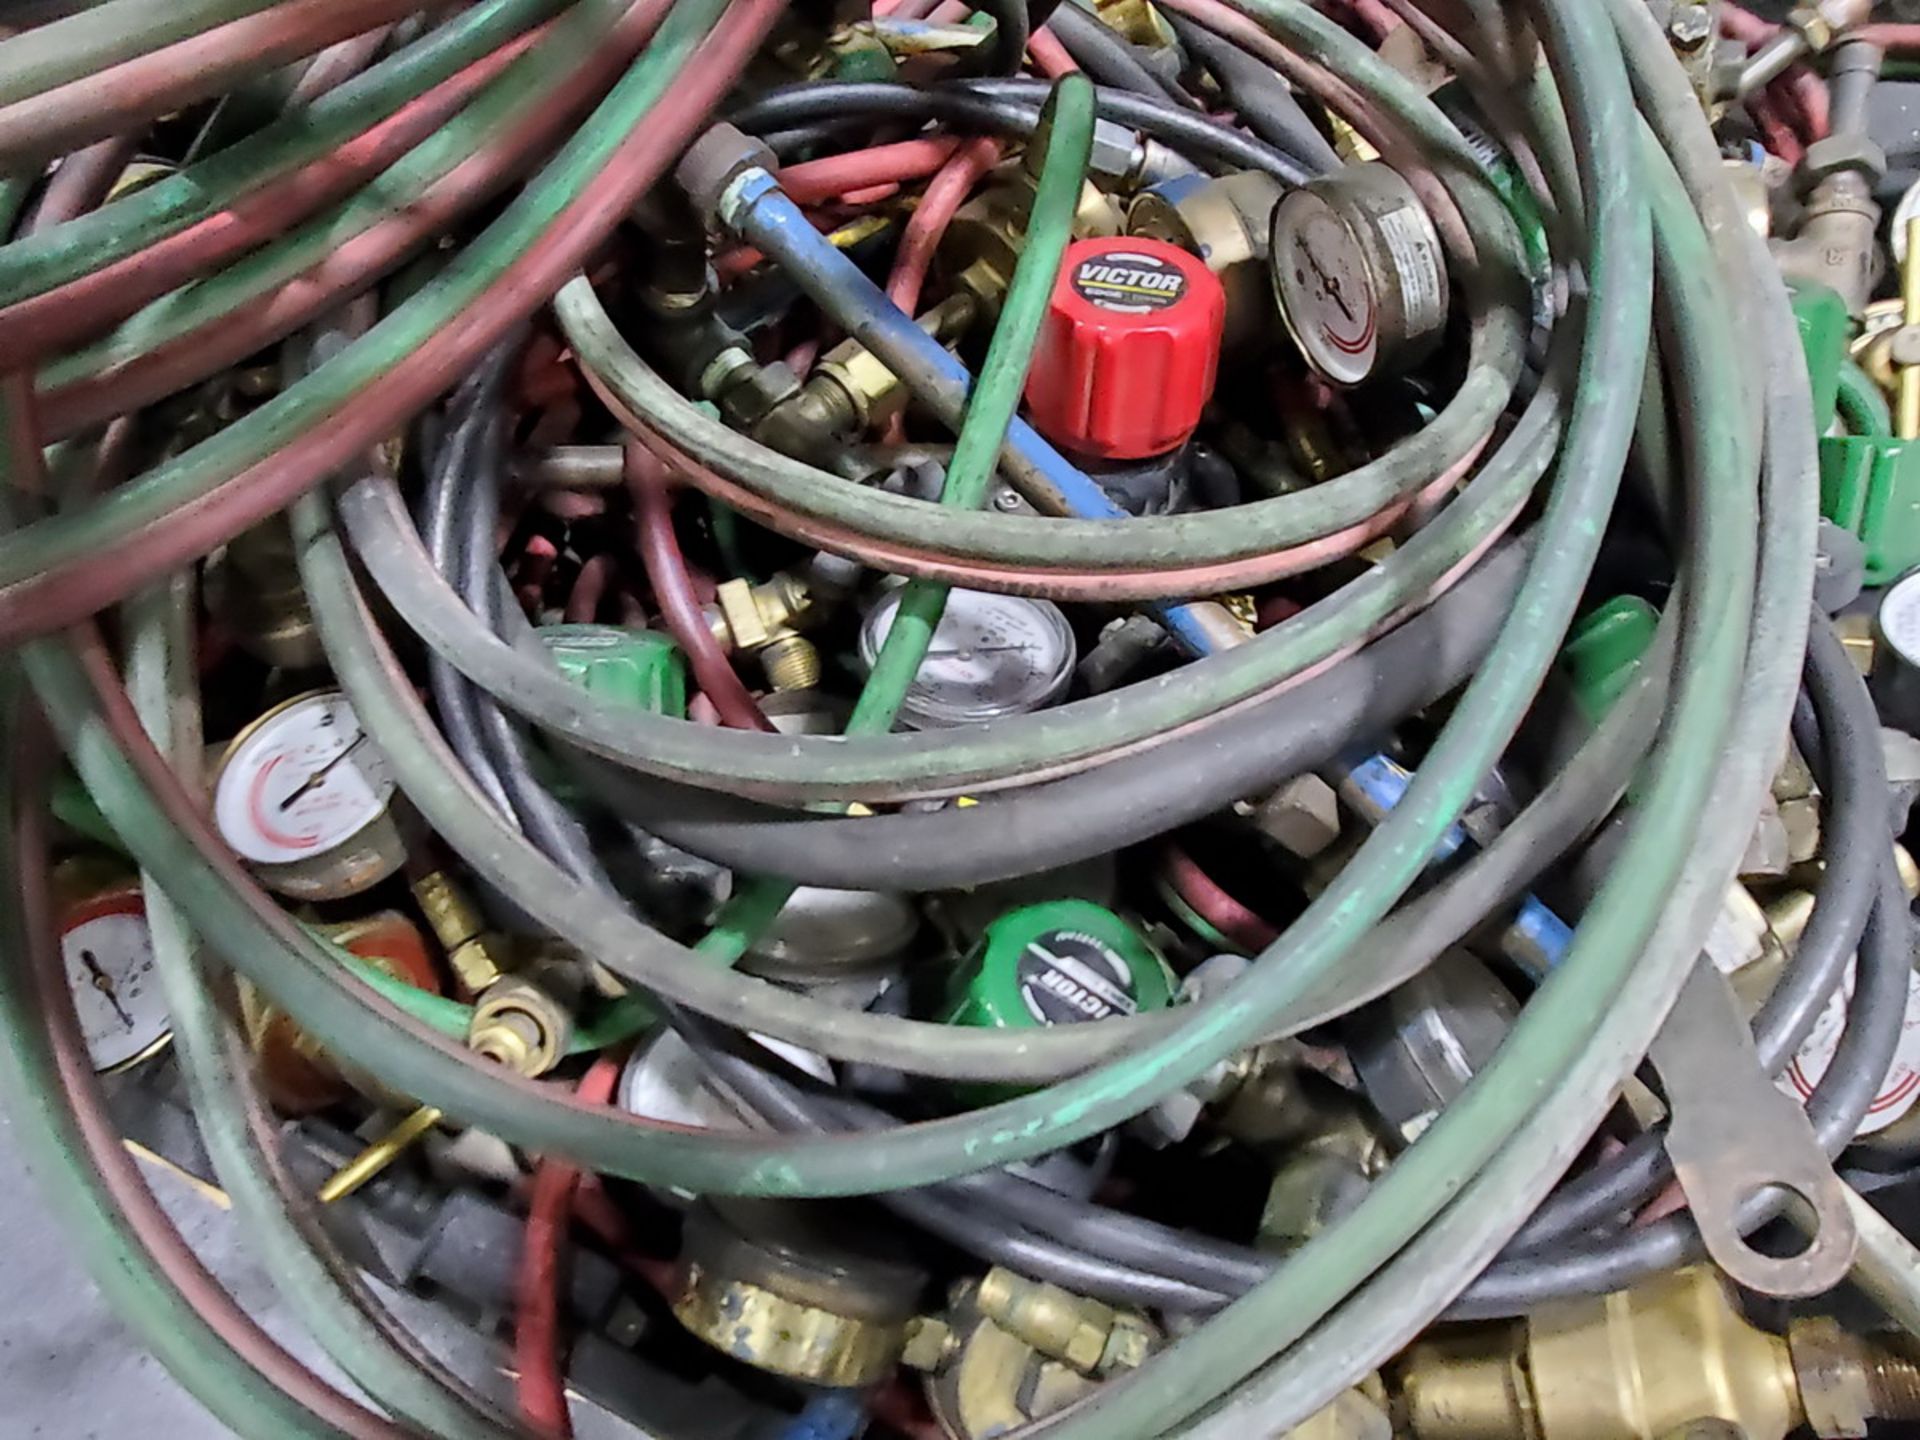 Welding Contents To Include But Not Limited To: Regulators, Leads, Hoses, etc. - Image 5 of 9